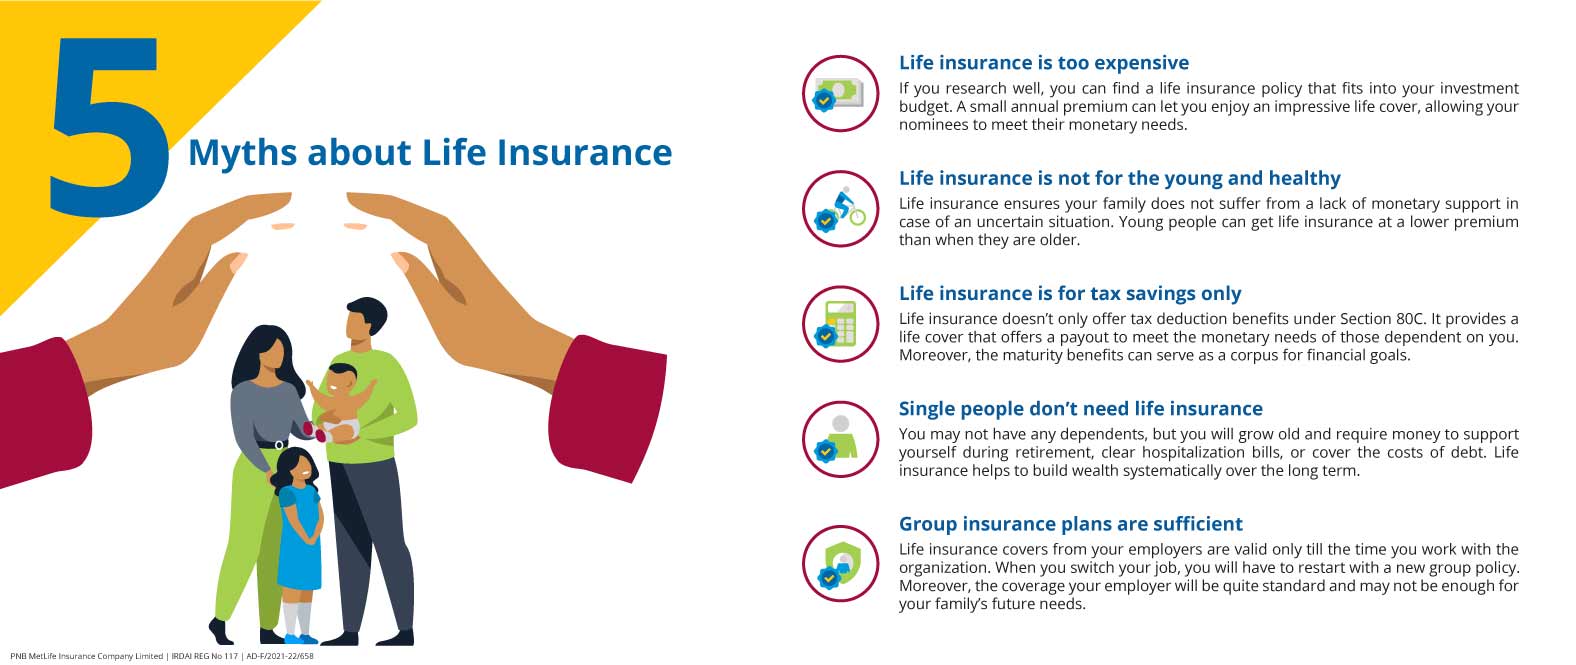 5 Myths about Life Insurance